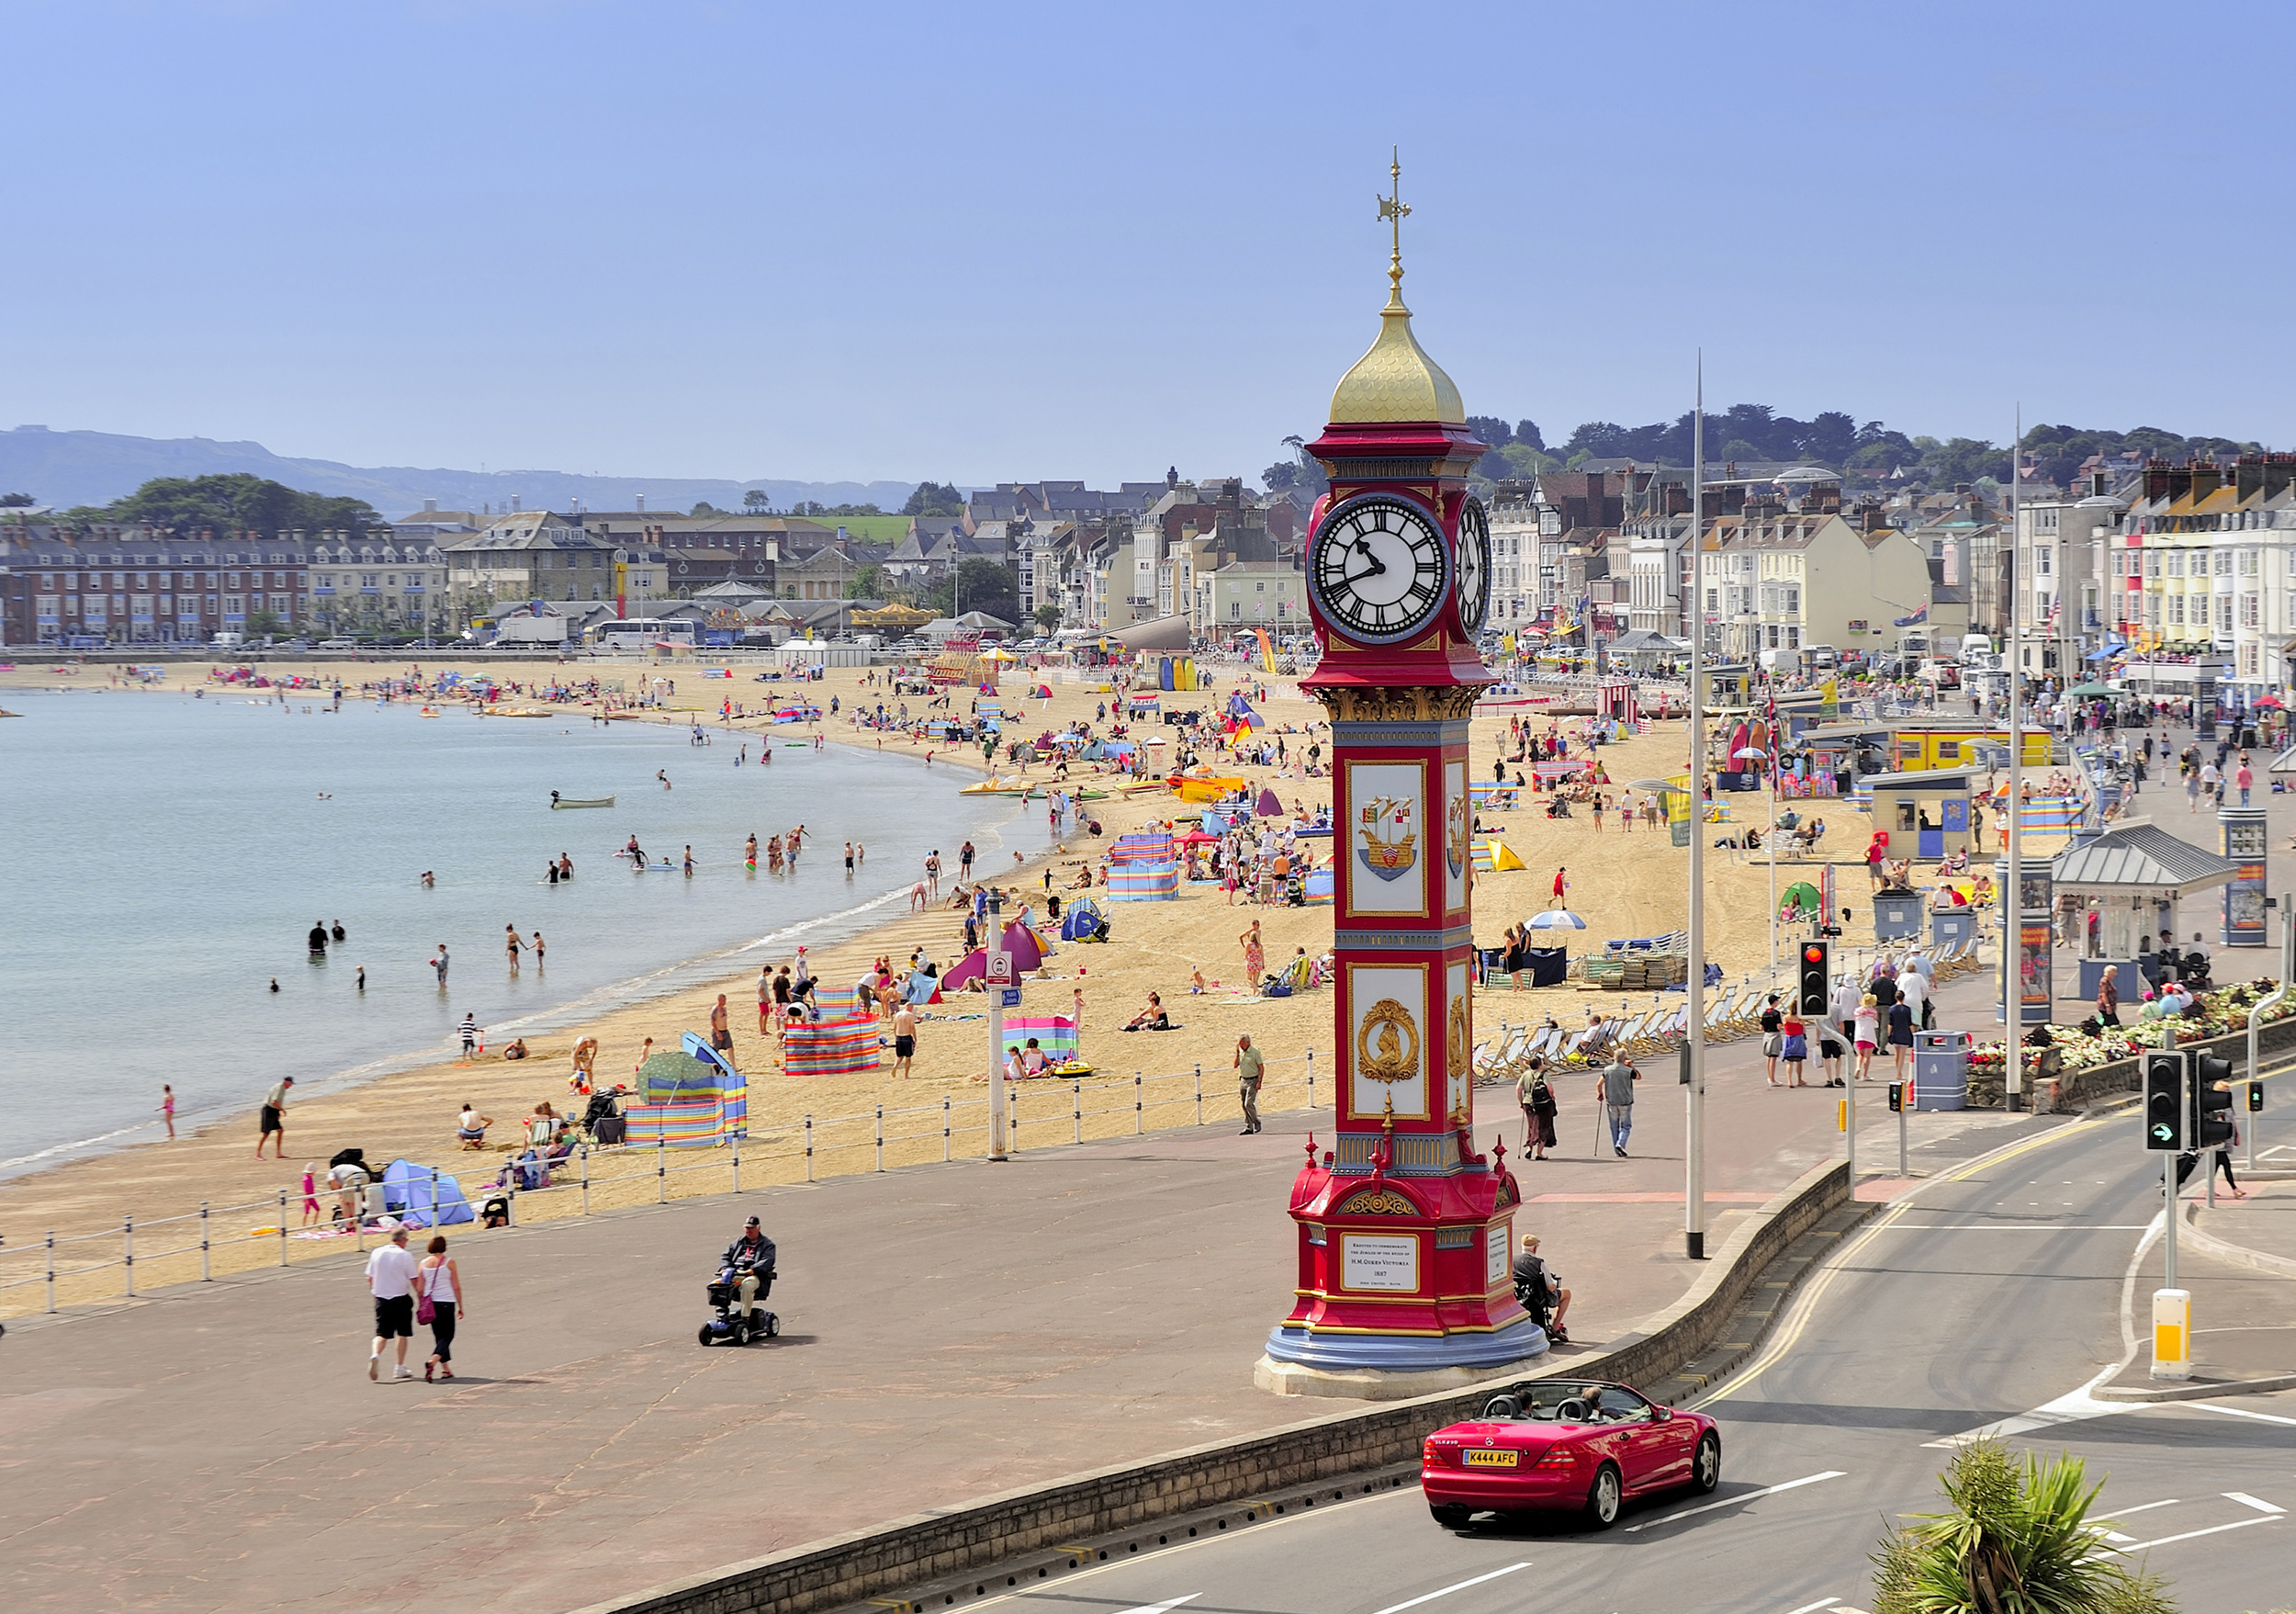 Weymouth Beach is home to some of Dorset's top tourist attractions